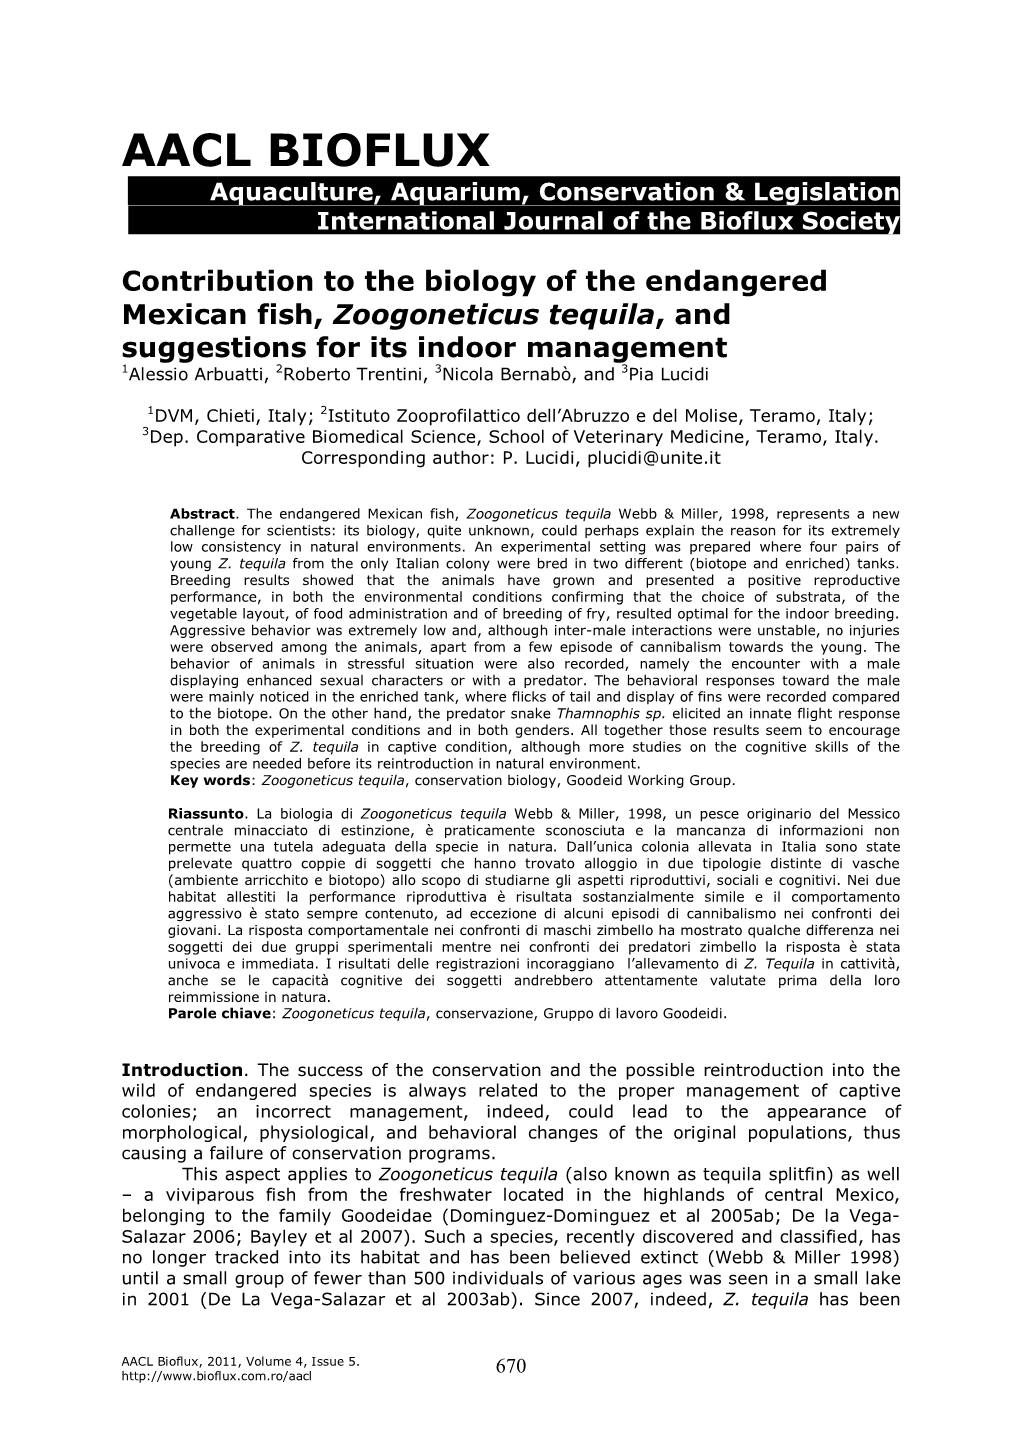 Arbuatti A., Trentini R., Bernabò N., Lucidi P., 2011 Contribution to the Biology of the Endangered